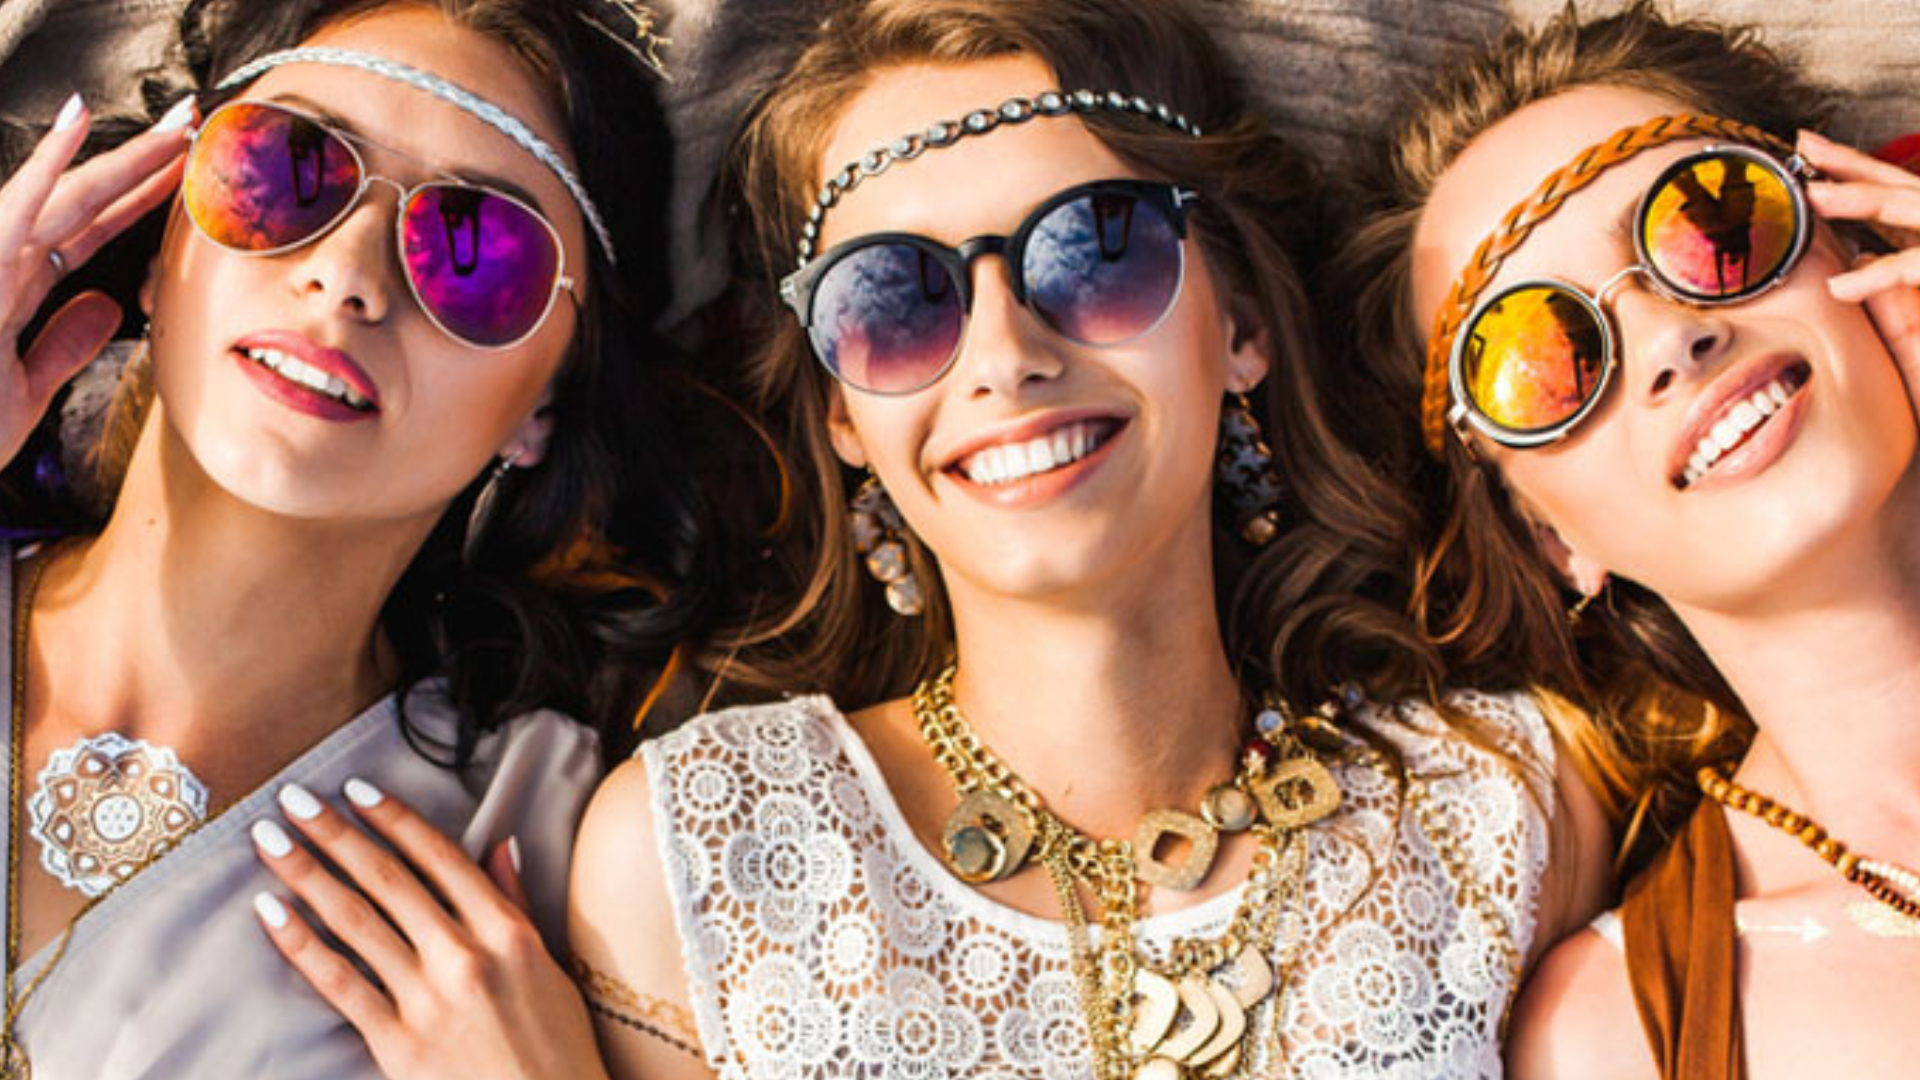 Retro Sunnies Are Making A Comeback In All Kinds Of Shades And Designs